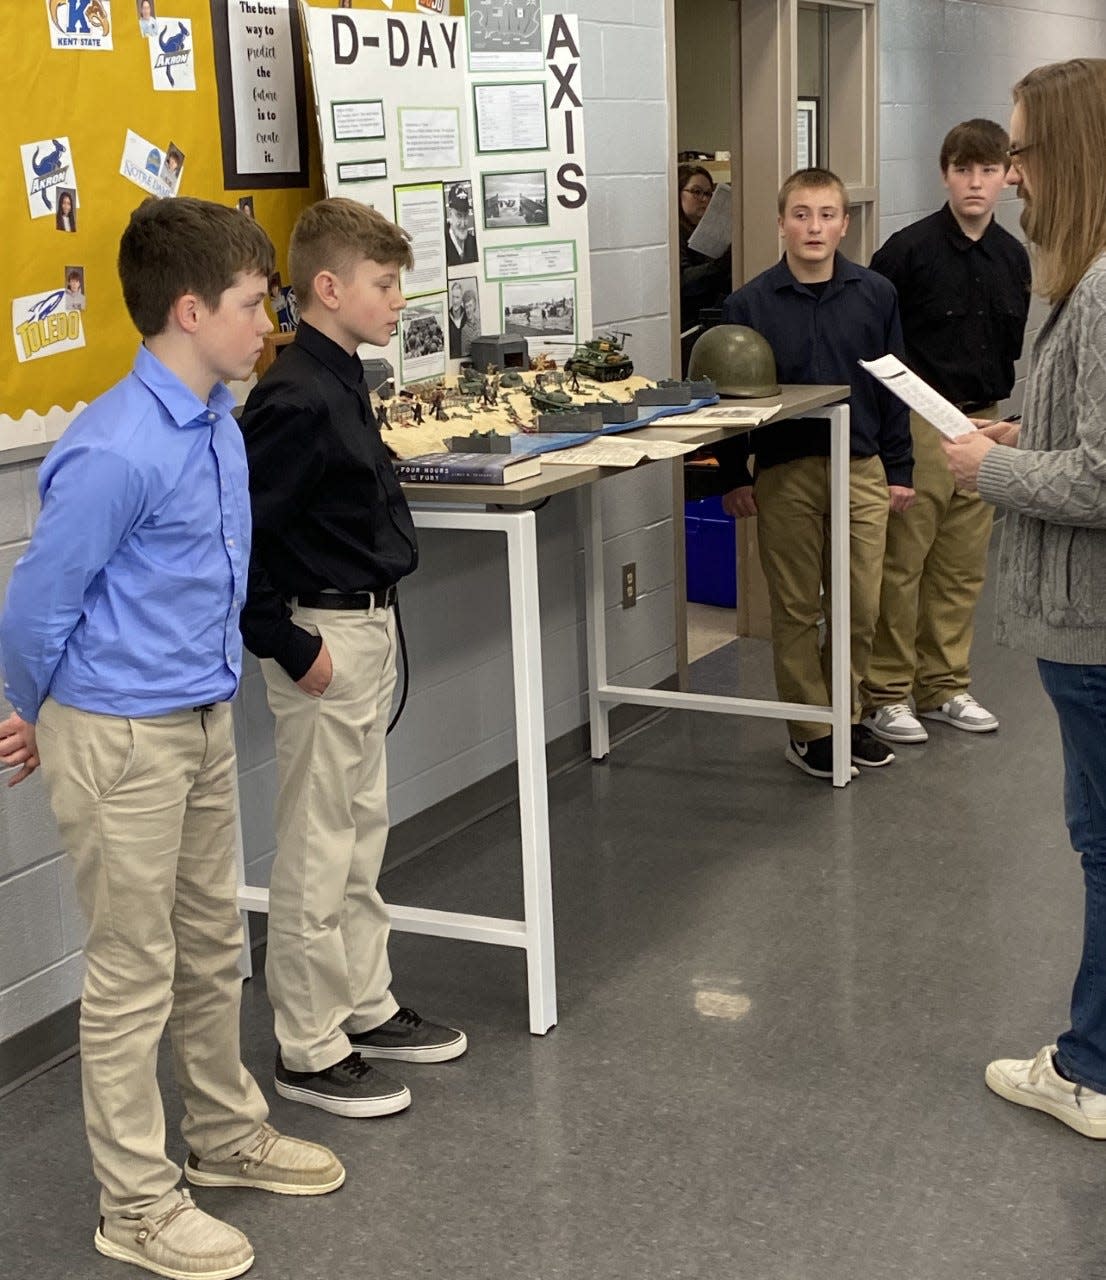 Windham Junior High School seventh graders, from left, Alex Eye, Bryan Smithberger, Michael Bolyard and Devin Sherman present a project about D-Day to Youngstown State University graduate students.